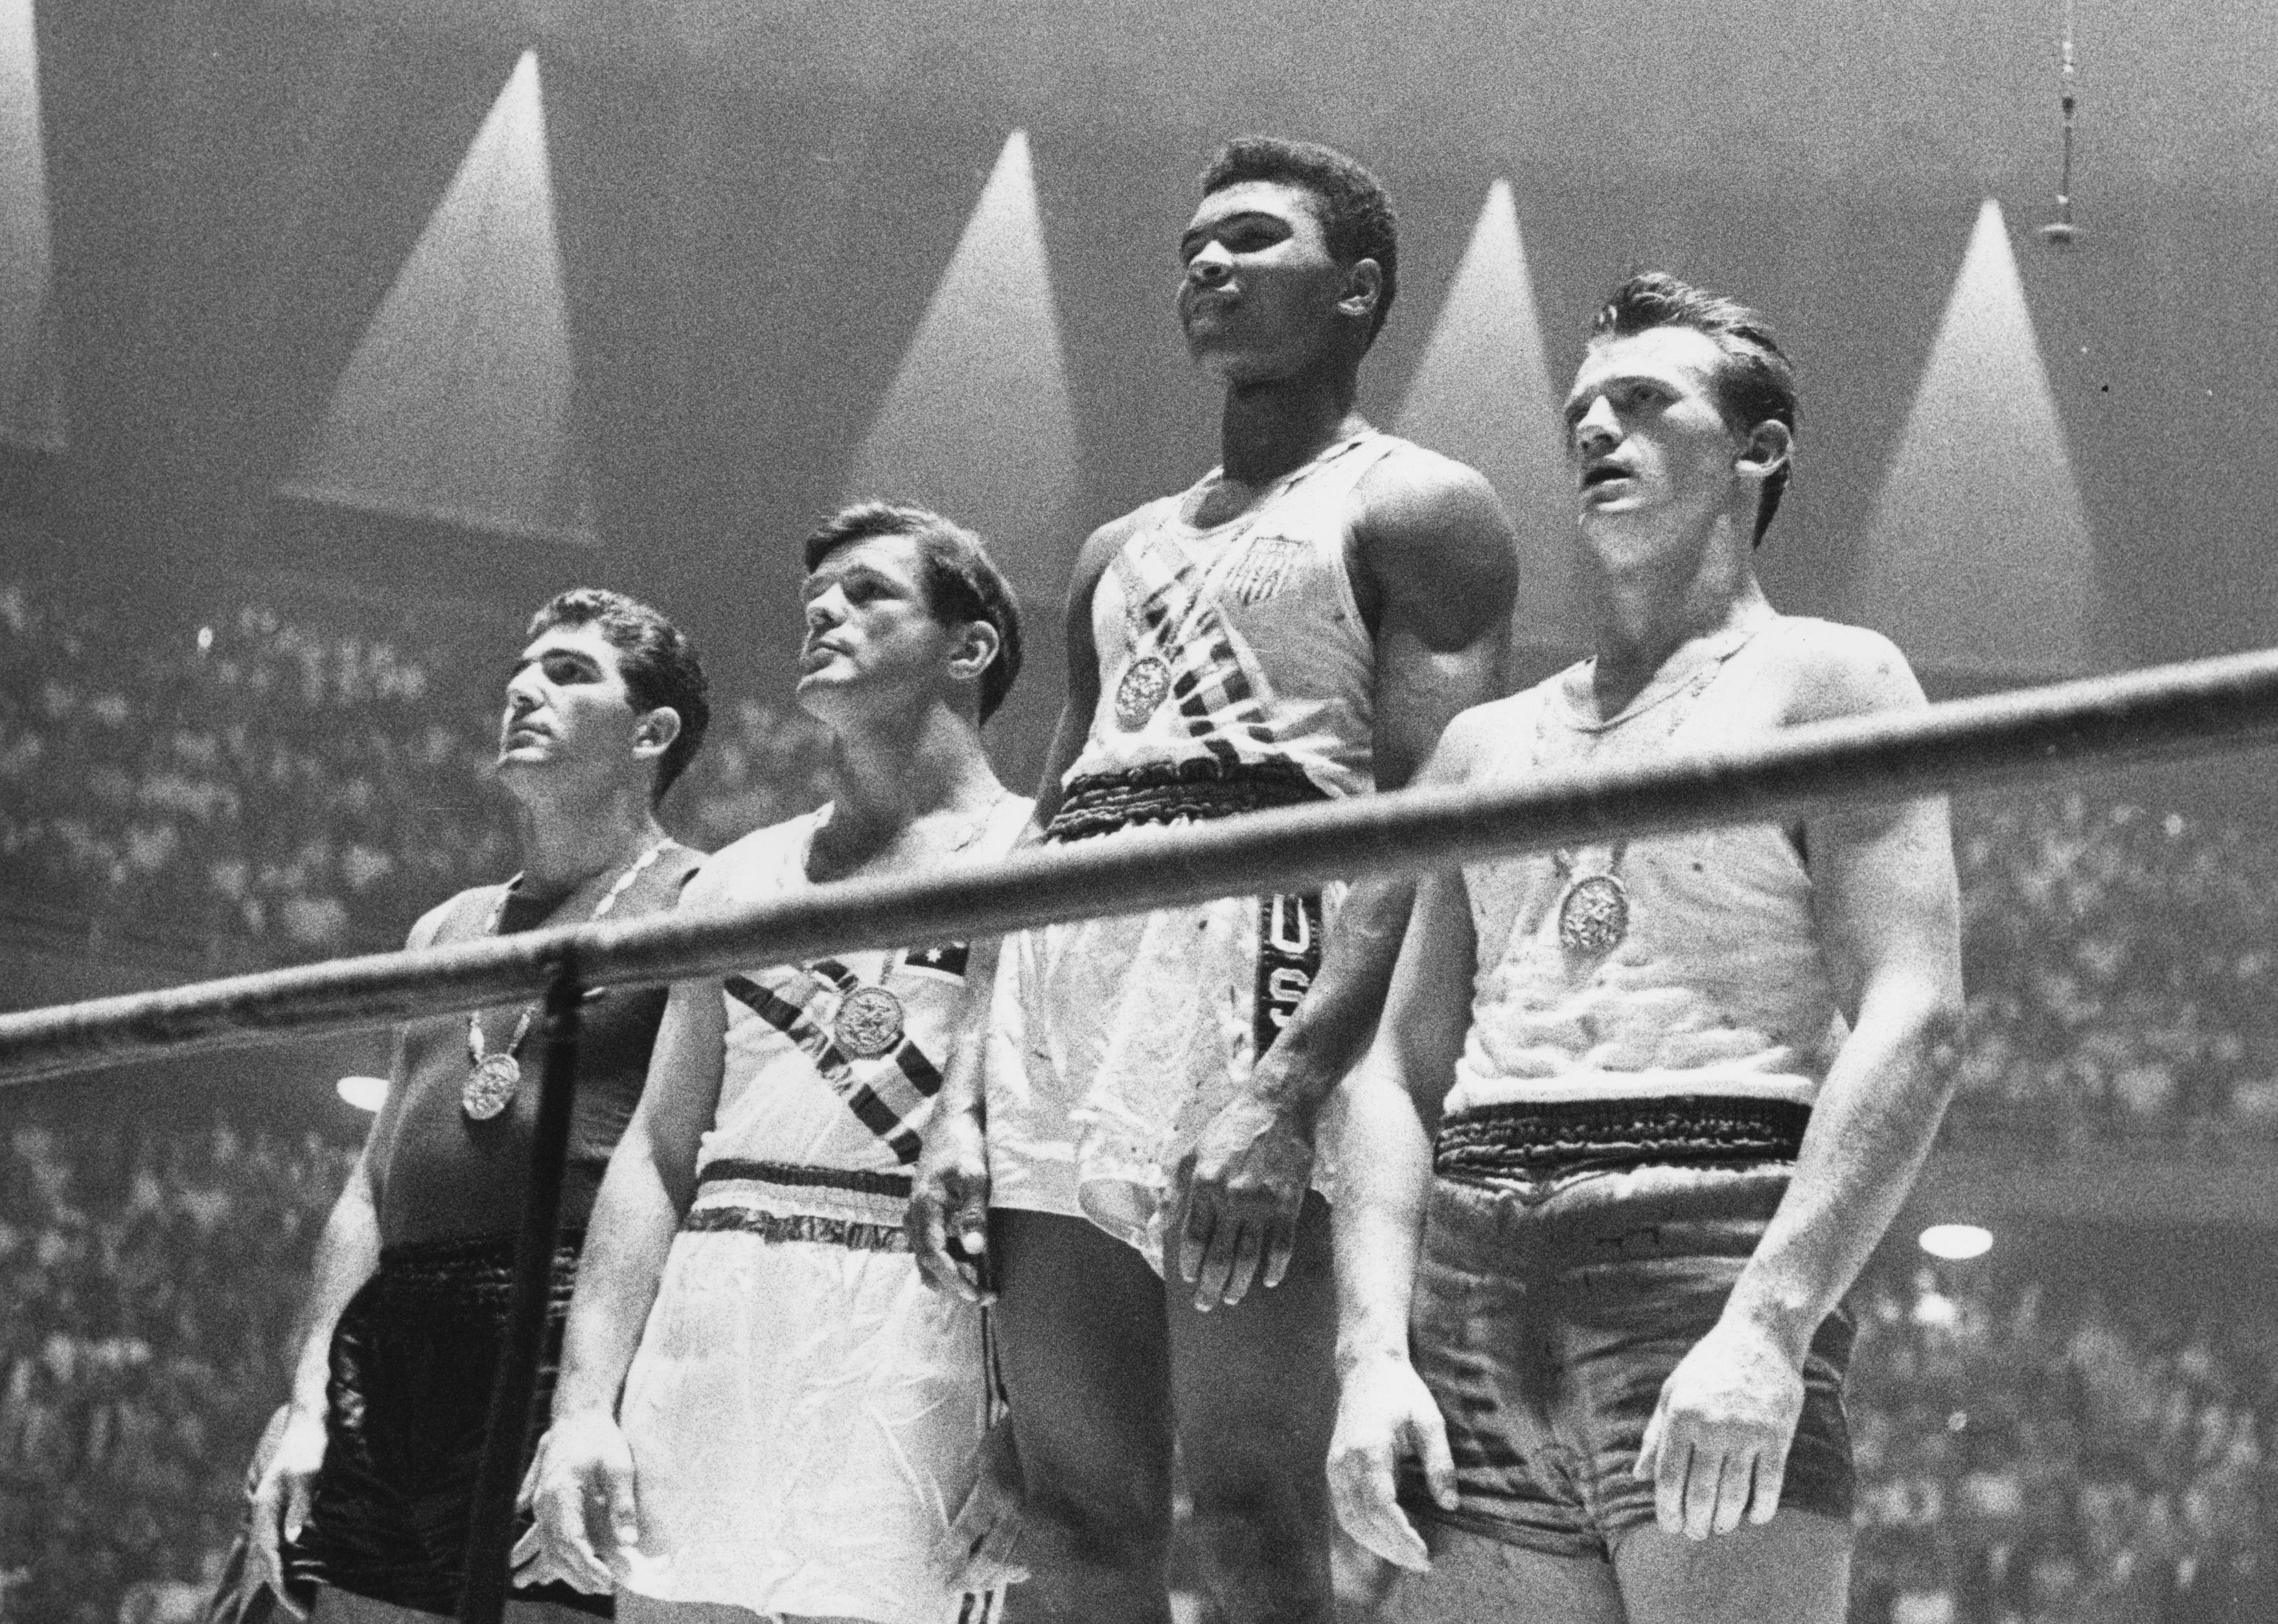 The winners of the 1960 Olympic medals for light heavyweight boxing on the winners' podium.